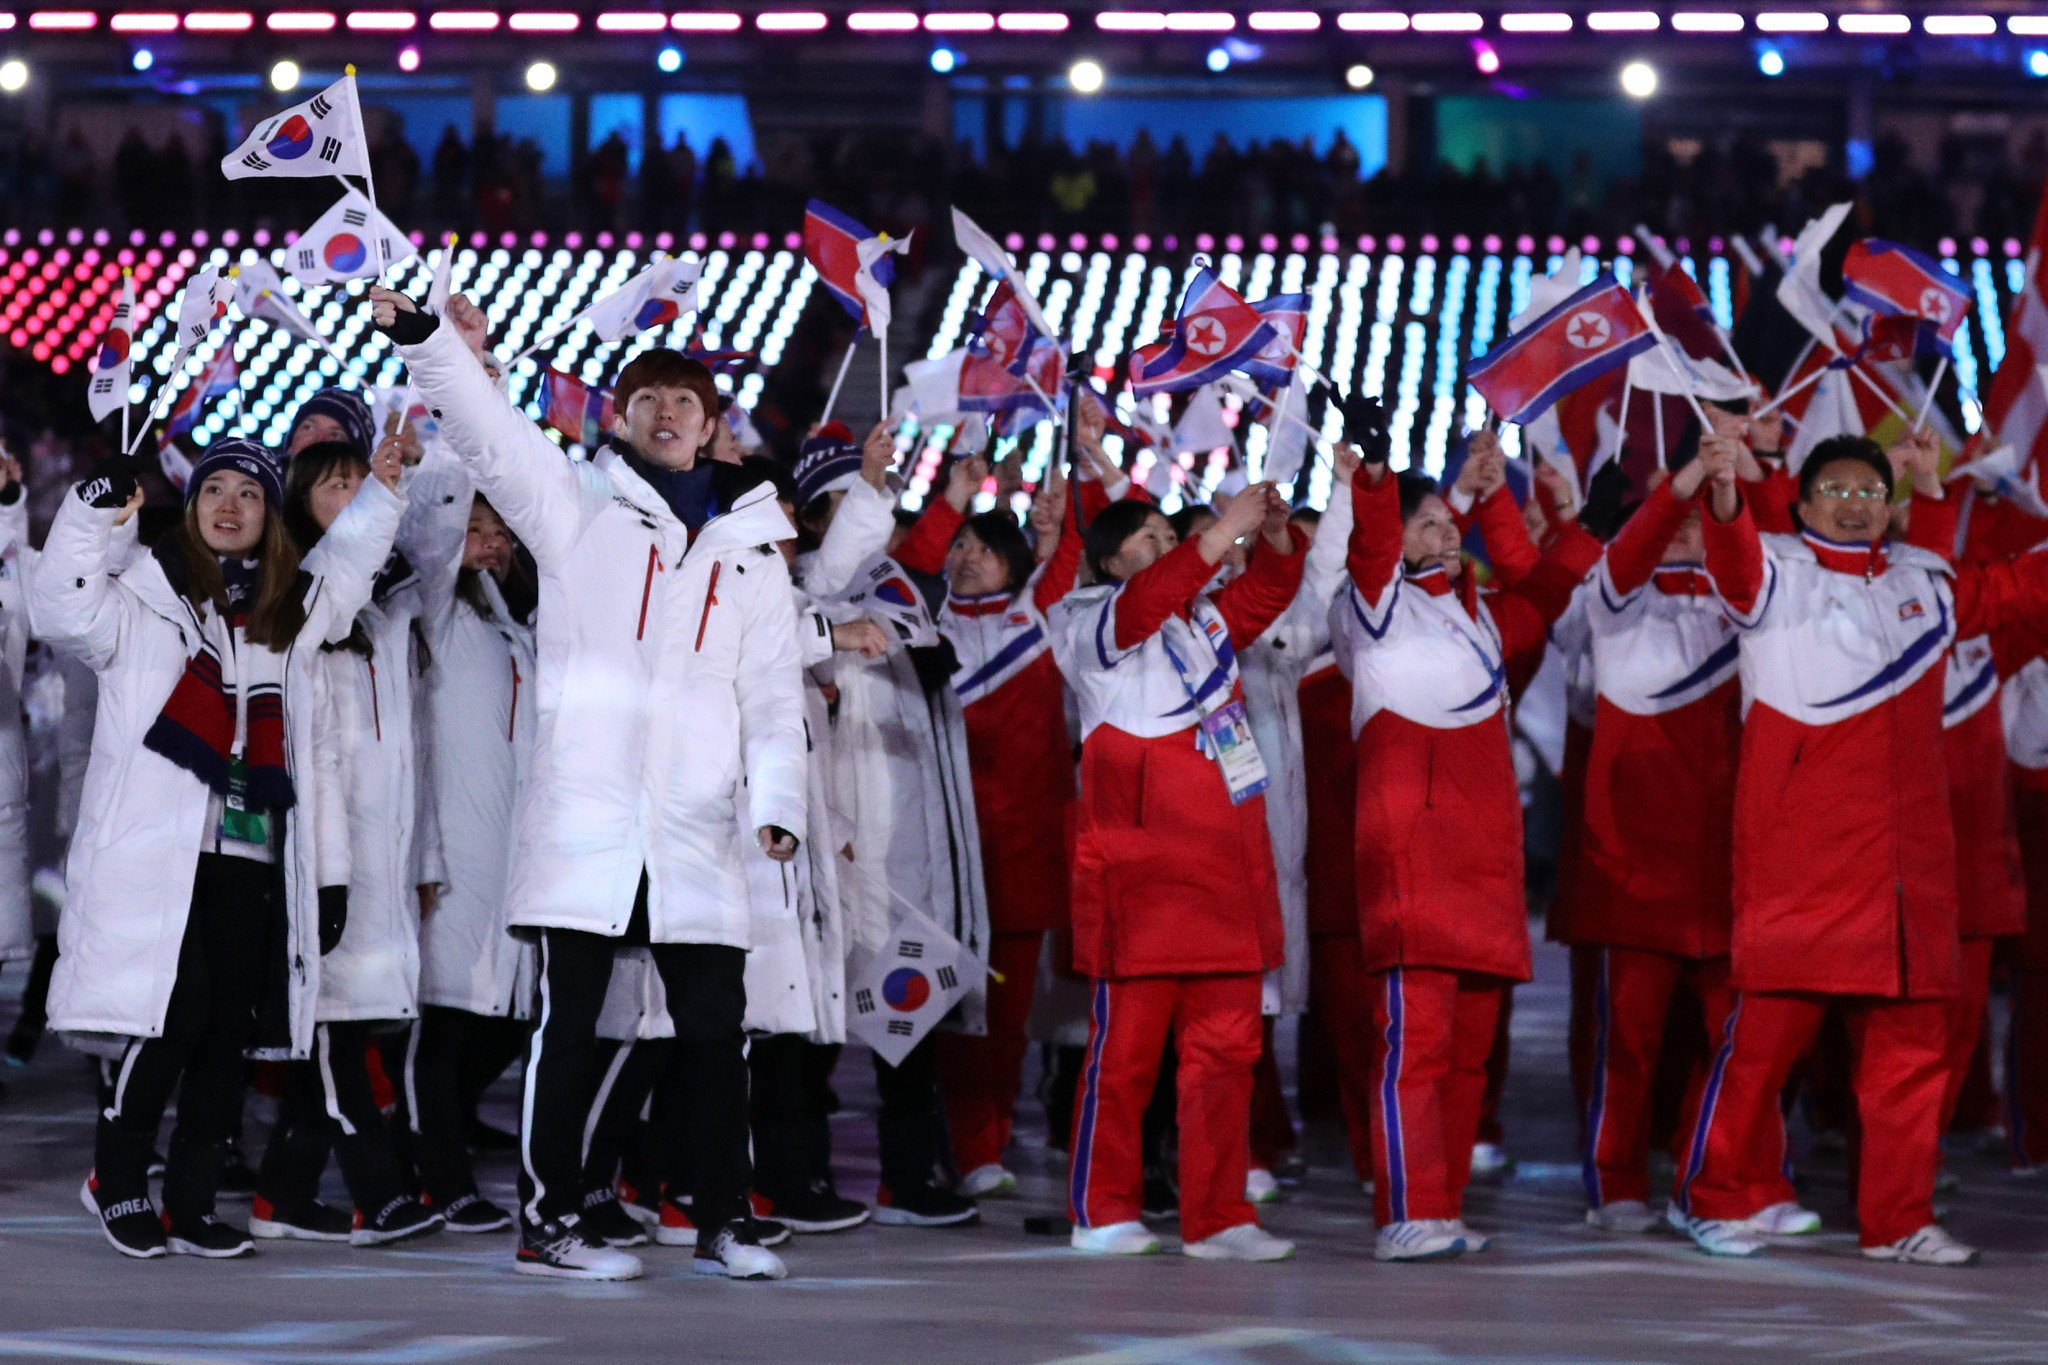 The South Korean and North Korean teams at the Pyeongchang 2018 Winter Olympics walked together during the Opening and Closing Ceremonies ©Getty Images